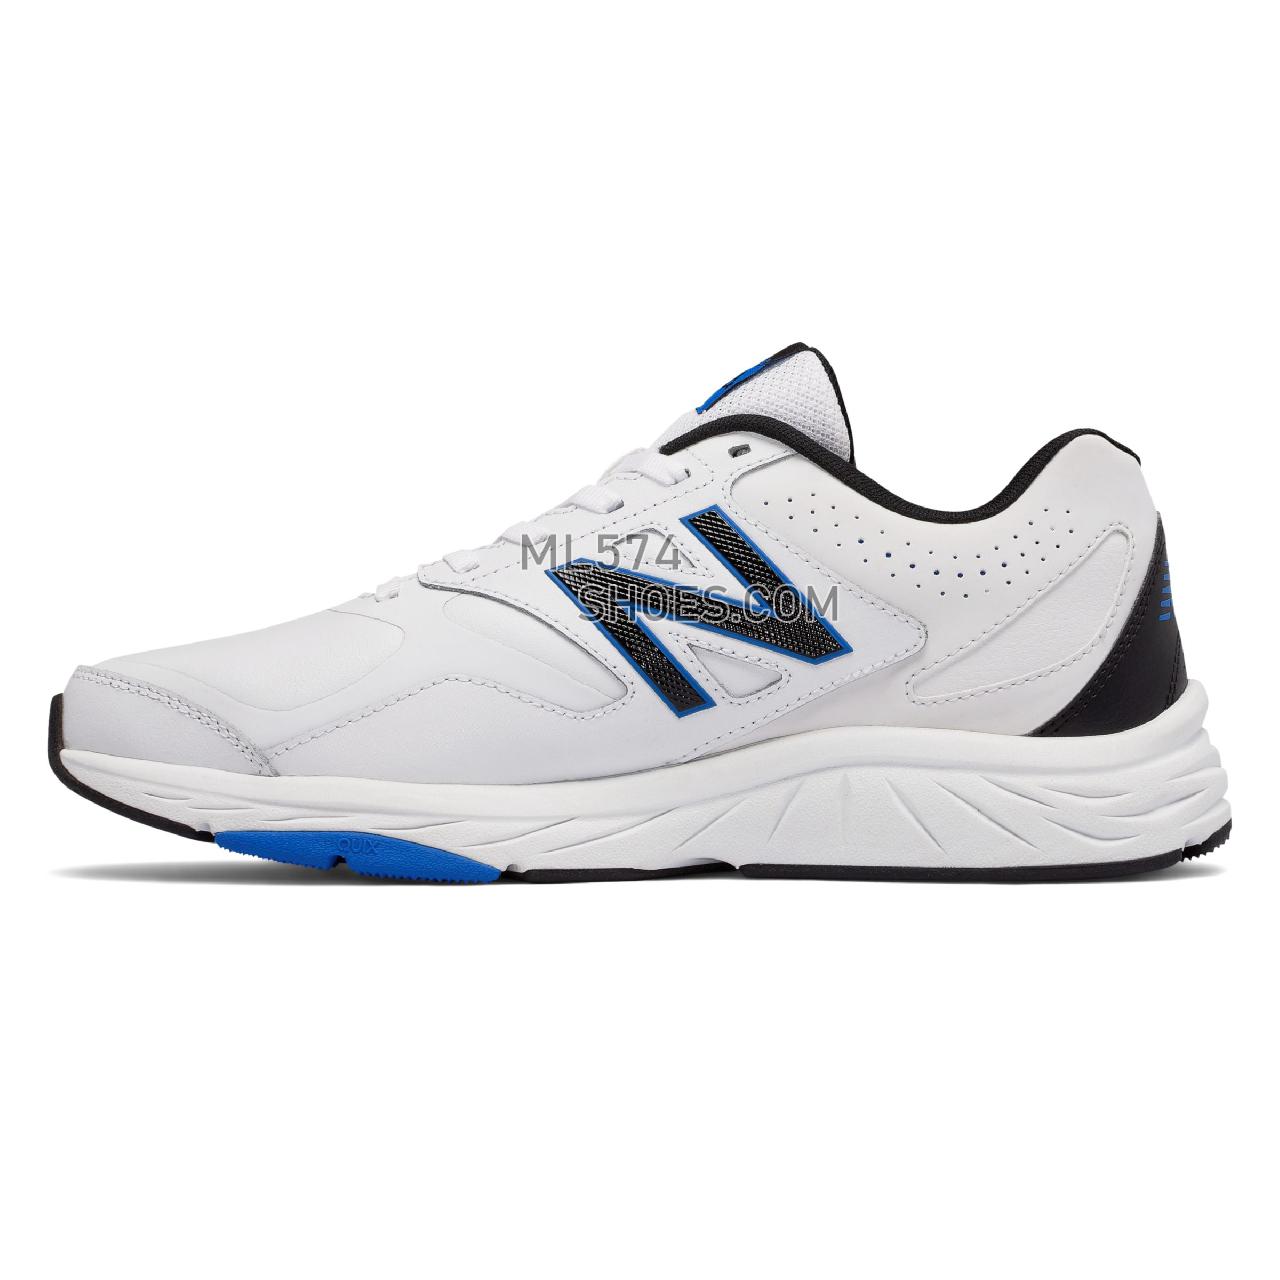 New Balance New Balance 824 Trainer - Men's 824 - X-training White with Black and Placid Blue - MX824WB1